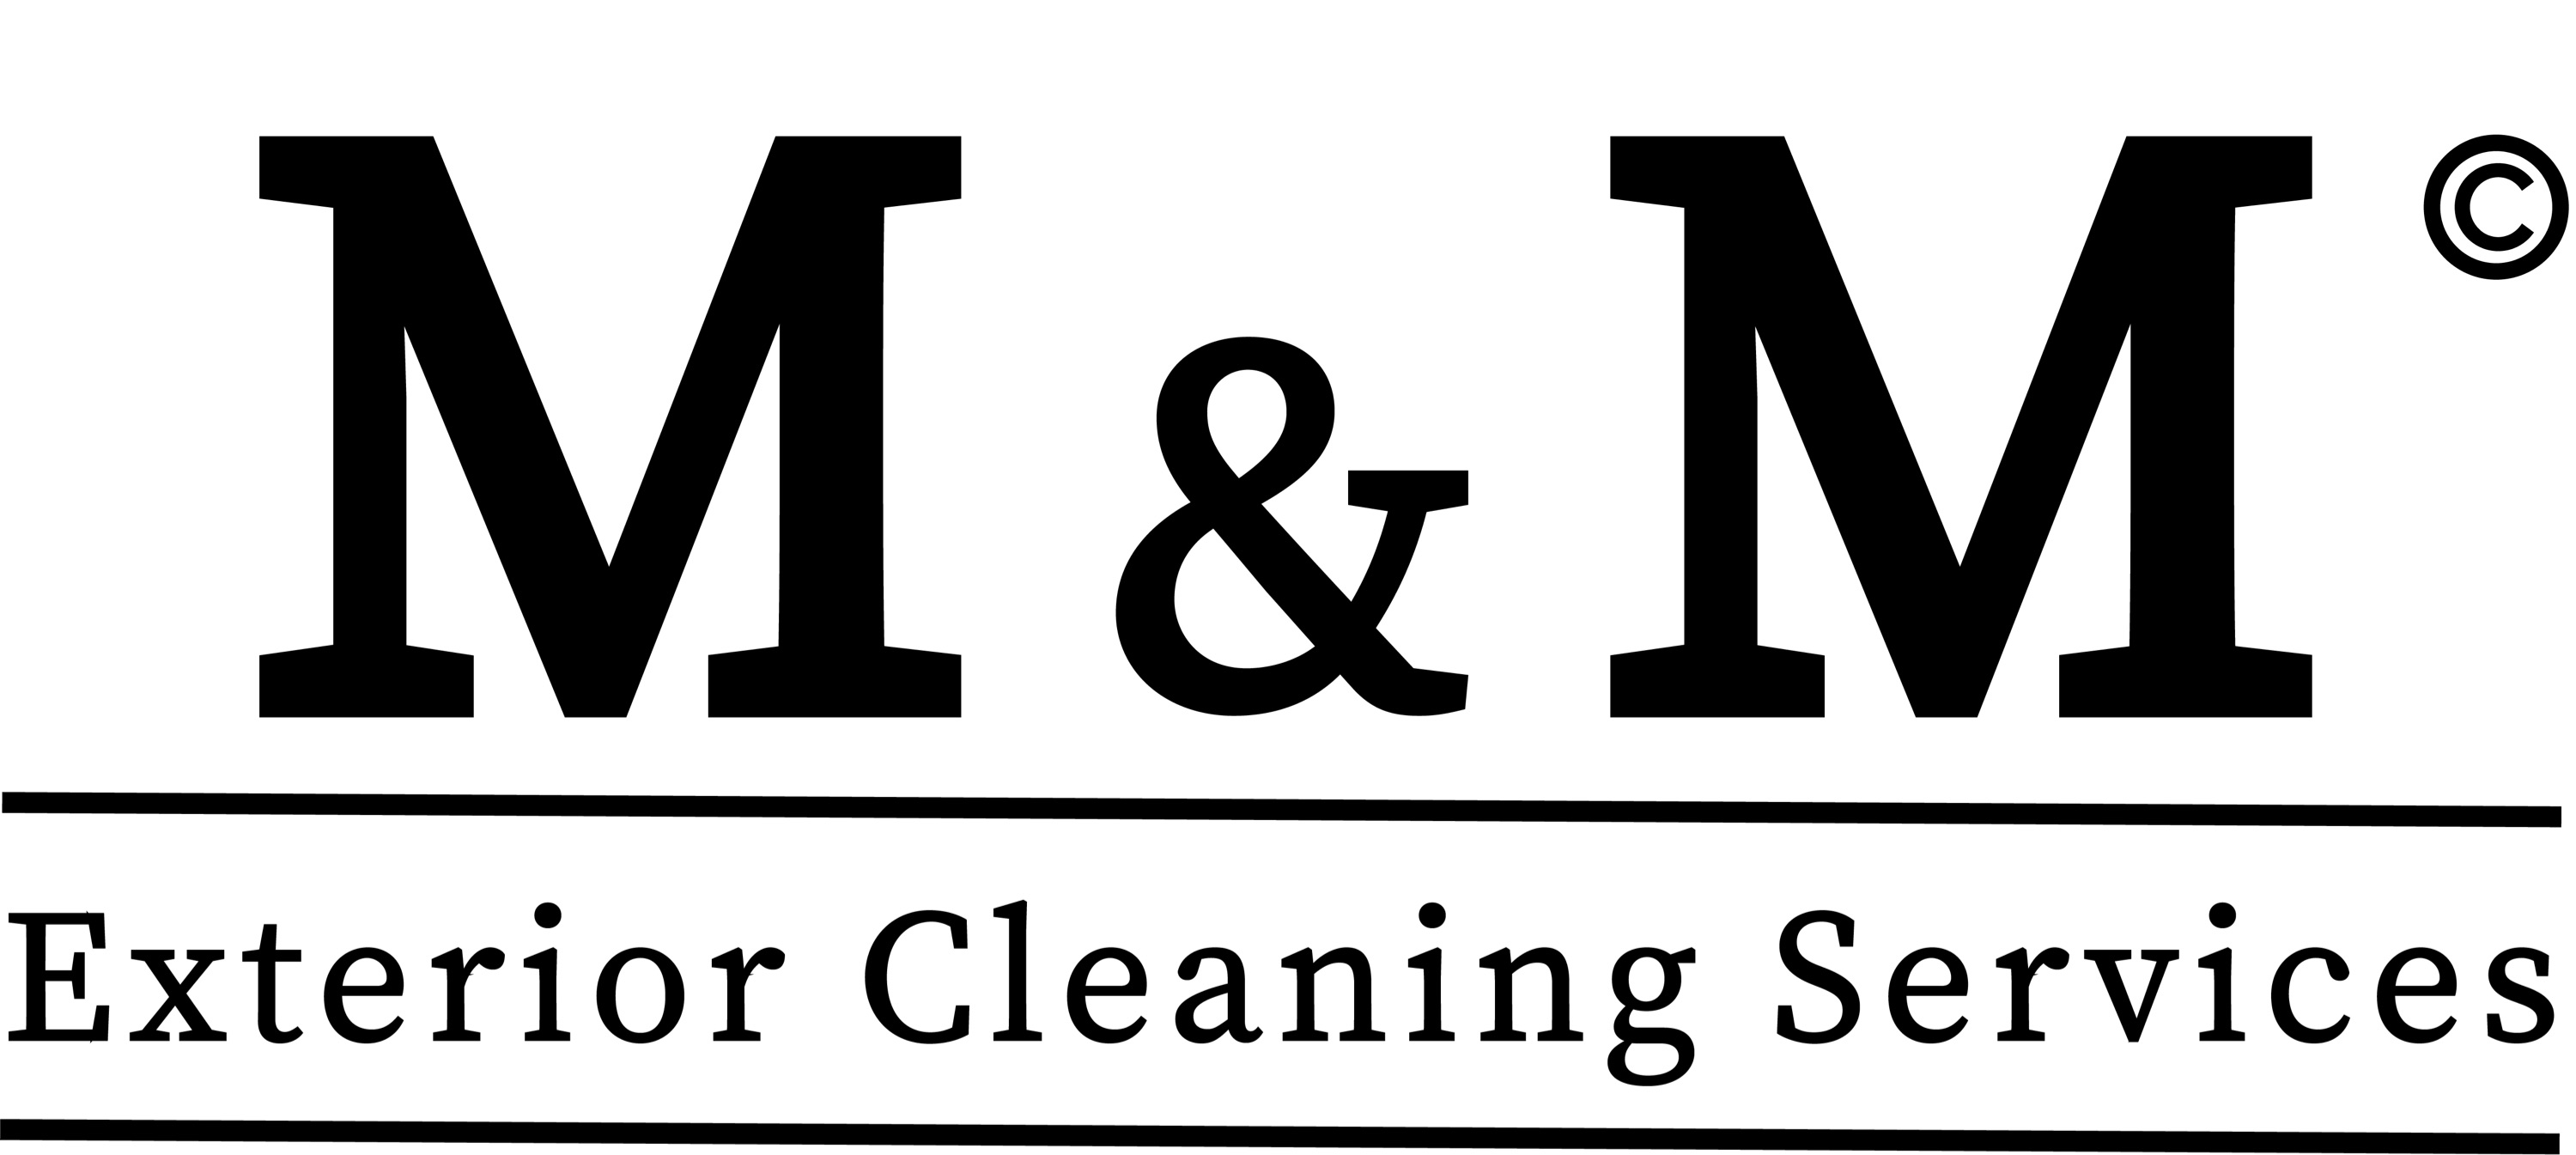 McCarthy & Morris Exterior Cleaning Services LLC Logo